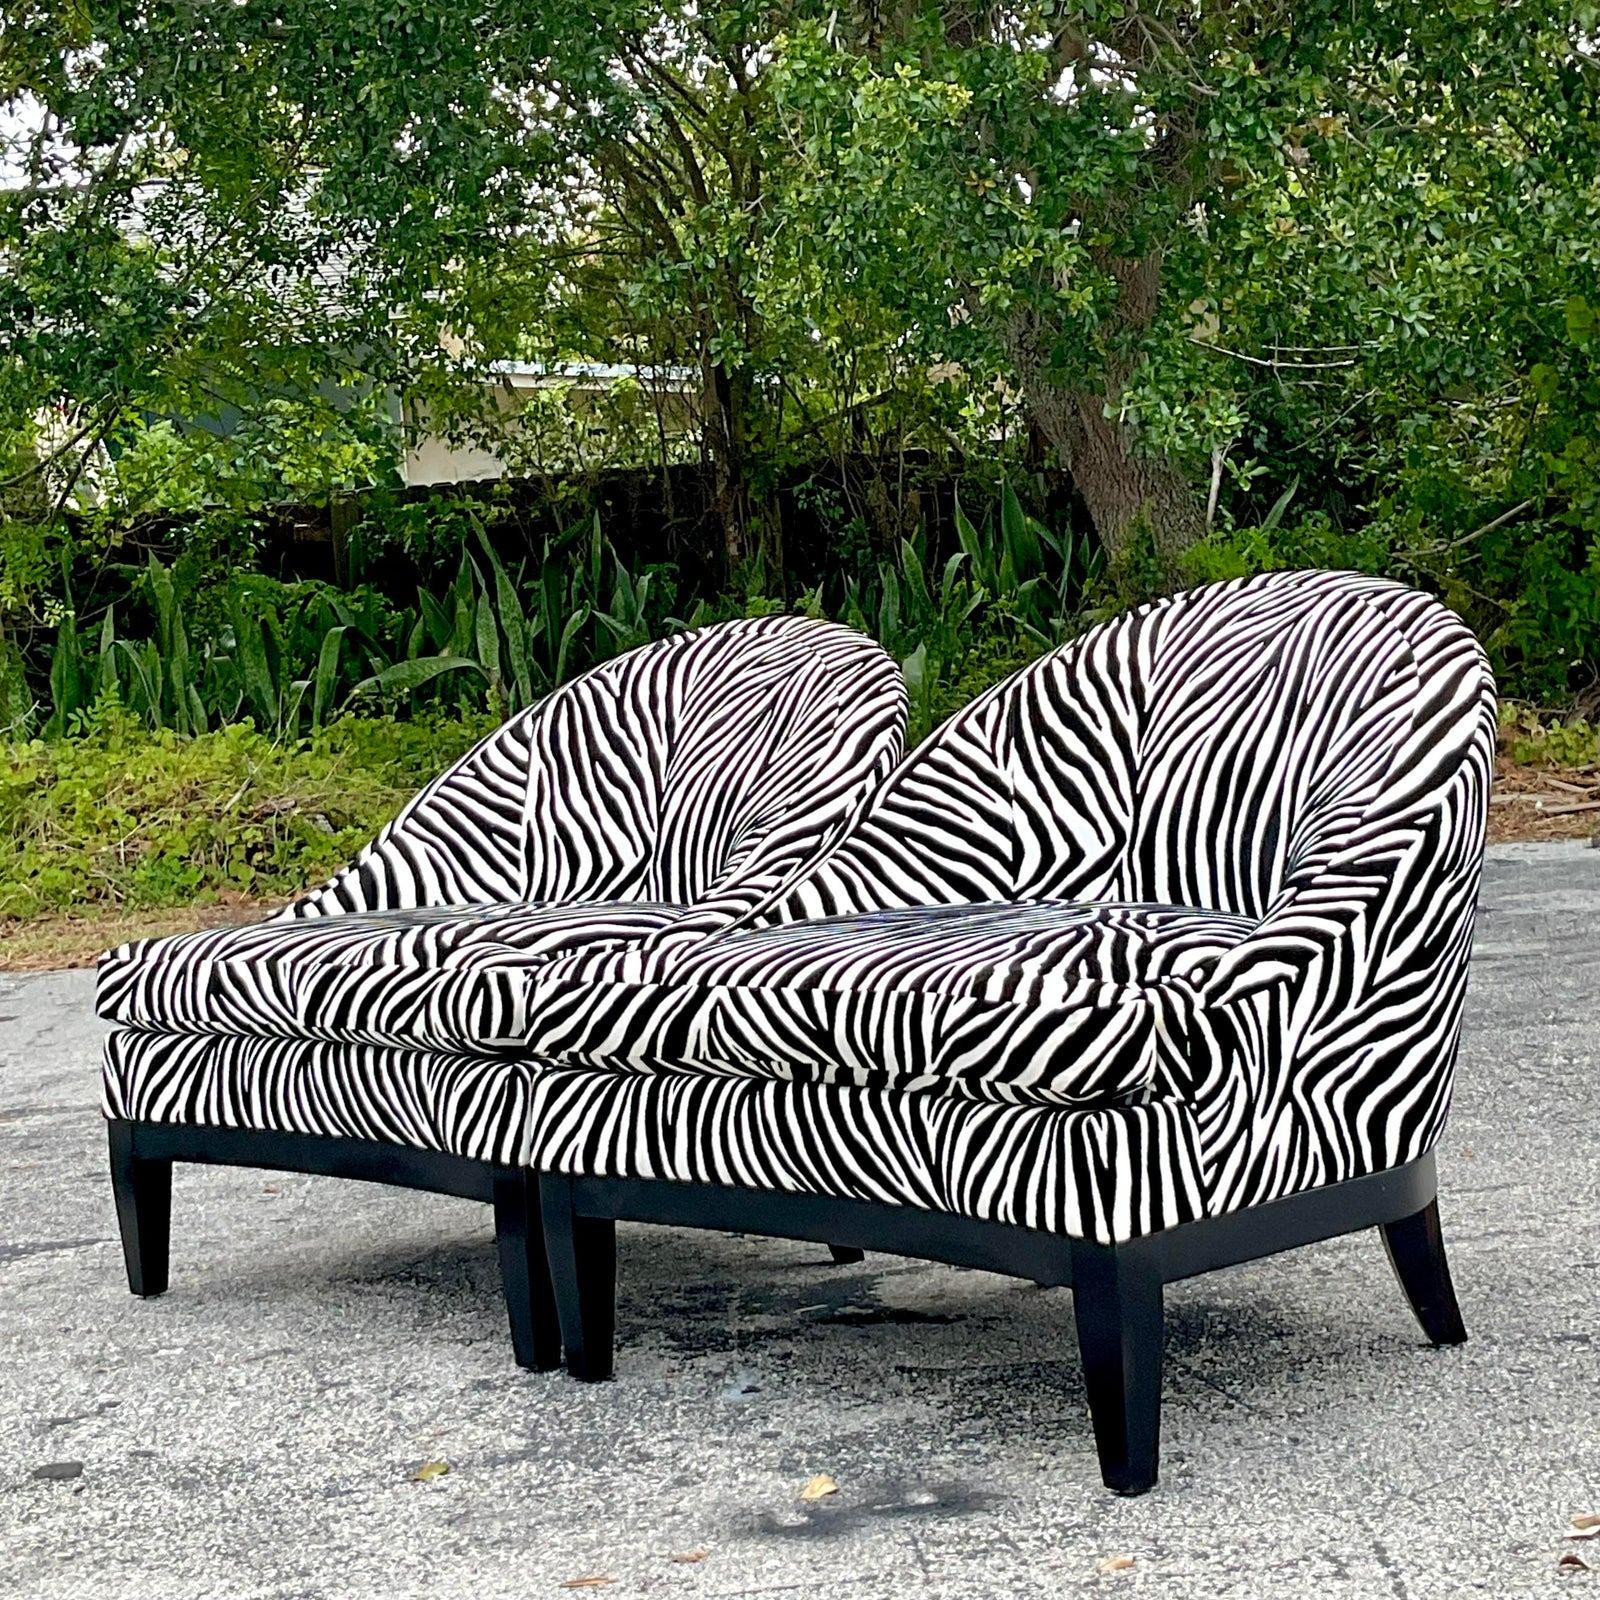 Elevate your living space with this pair of Vintage Boho Low Slung Zebra Lounge Chairs. Featuring a distinctive American flair, these chairs blend the relaxed elegance of bohemian style with bold zebra prints, creating a unique statement piece.